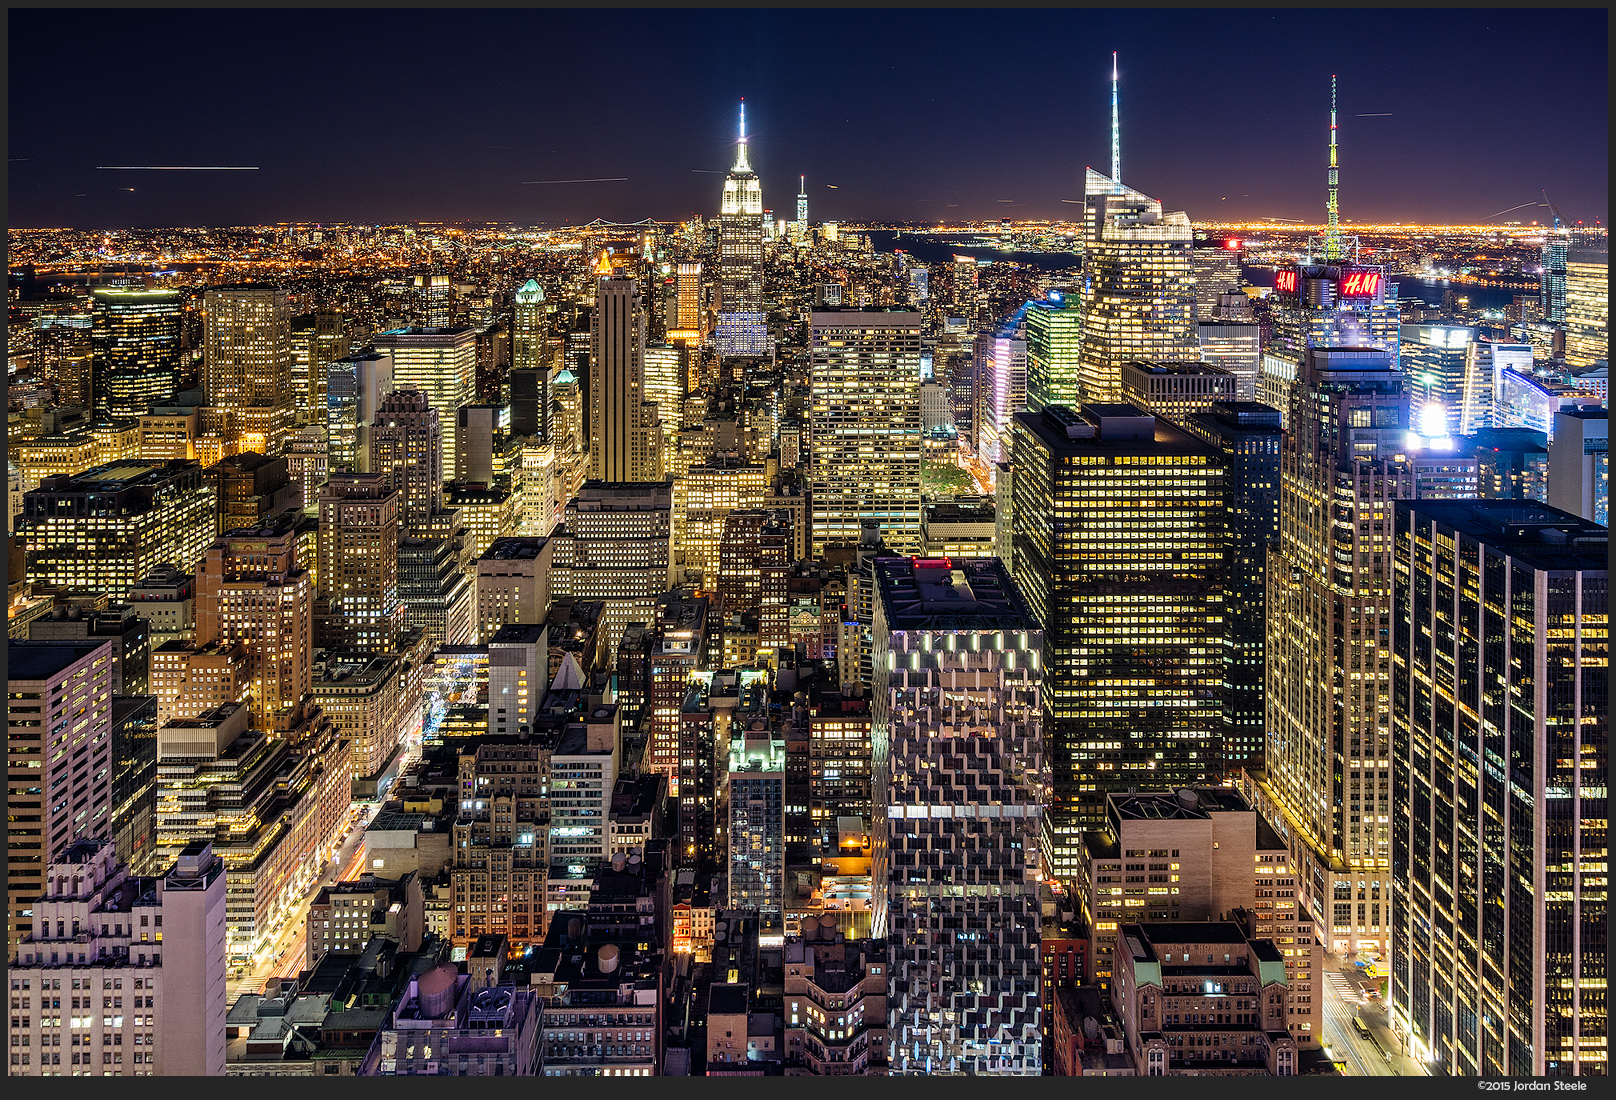 Manhattan from Top of the Rock - Sony A7 II with Zeiss FE 16-35mm f/4 @